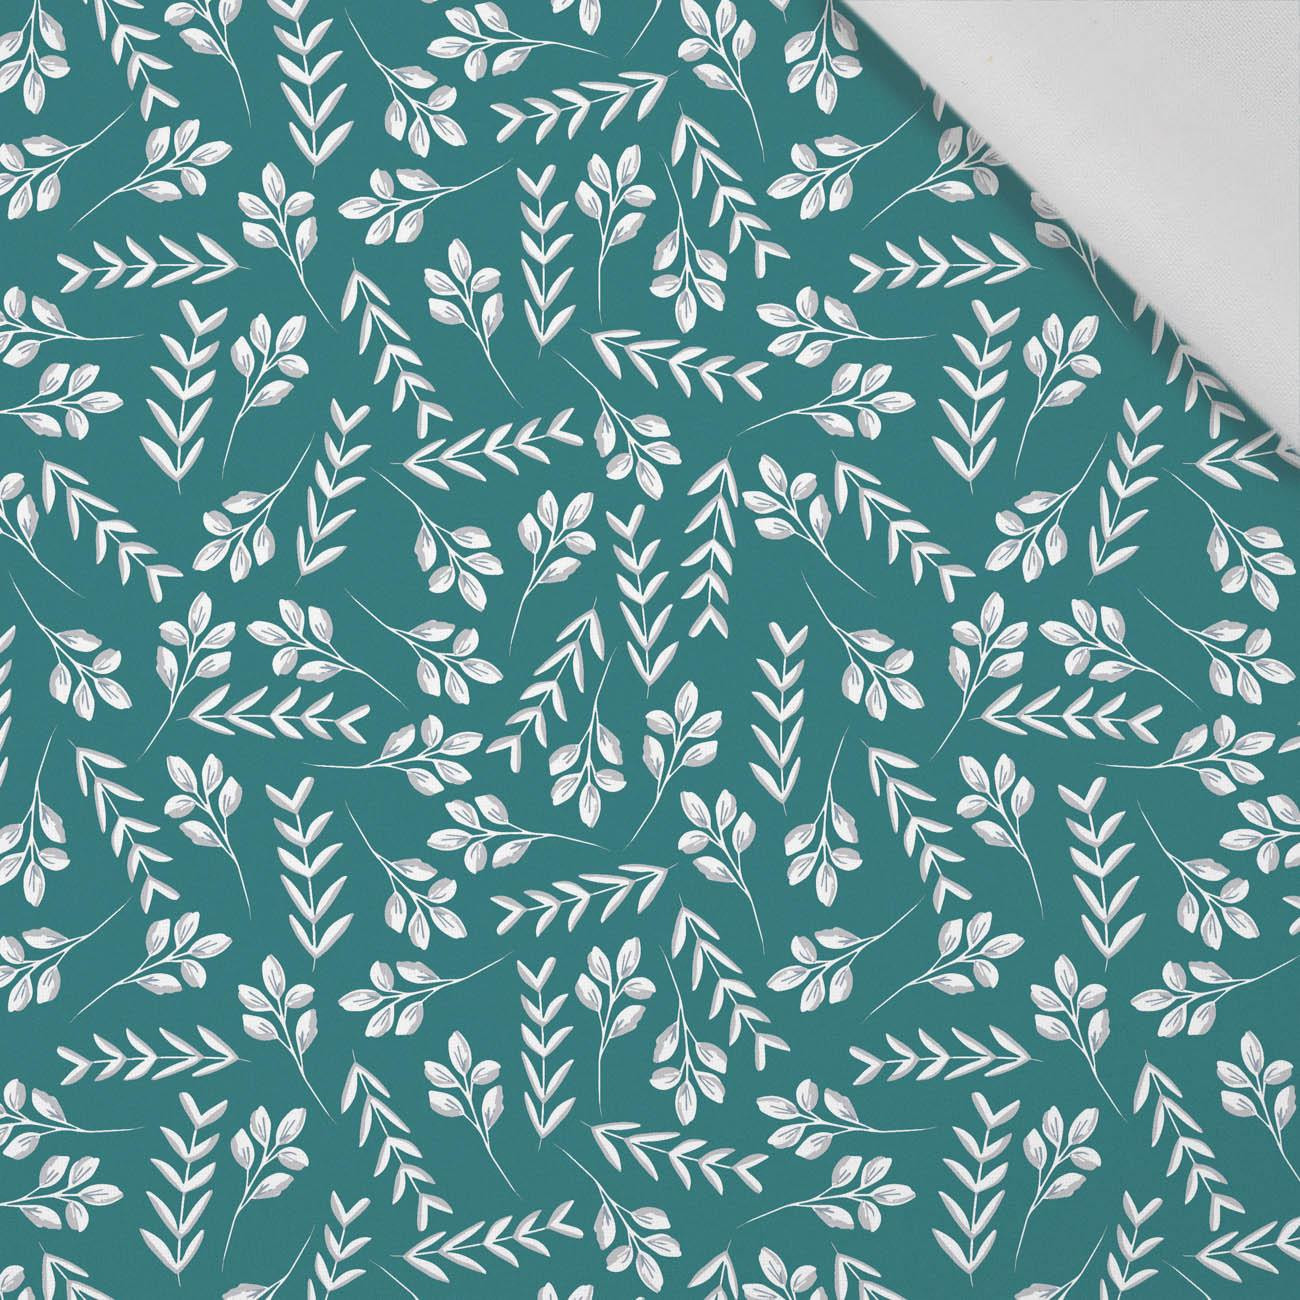 SMALL LEAVES pat. 2 / emerald - Cotton woven fabric